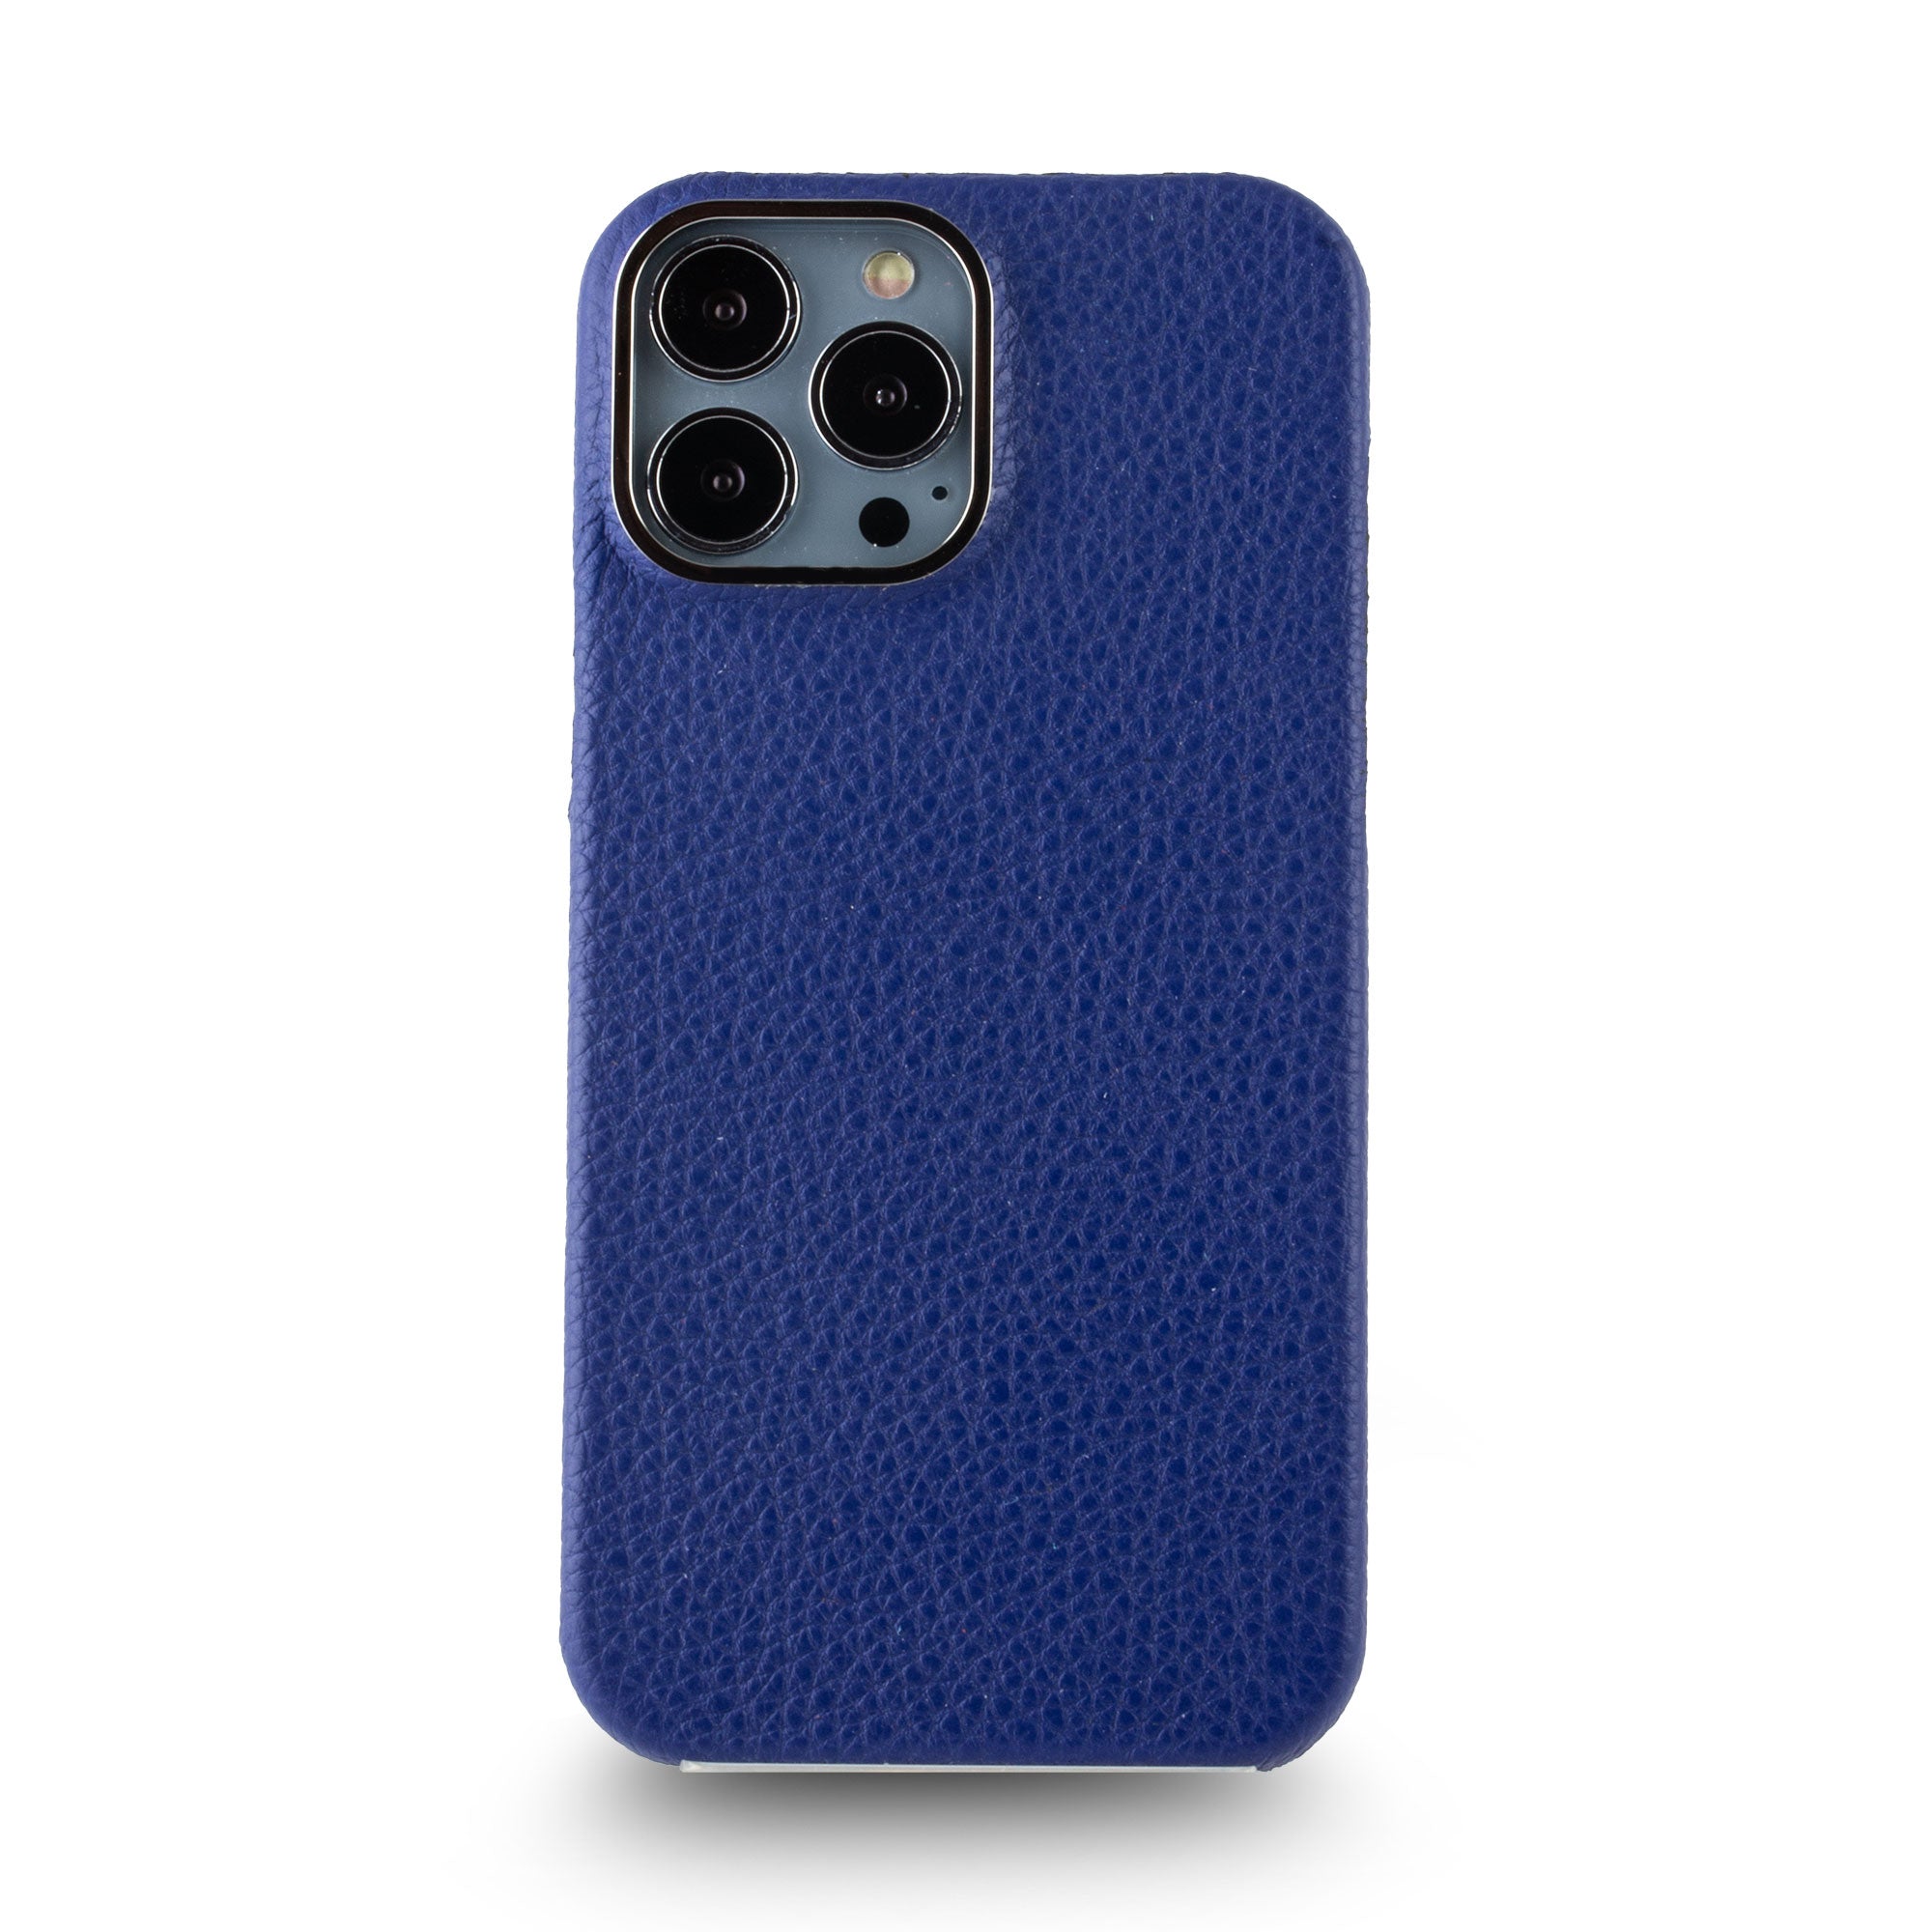 Clearance Sale - Leather iPhone case - iPhone 13 Pro Max - Blue buffalo